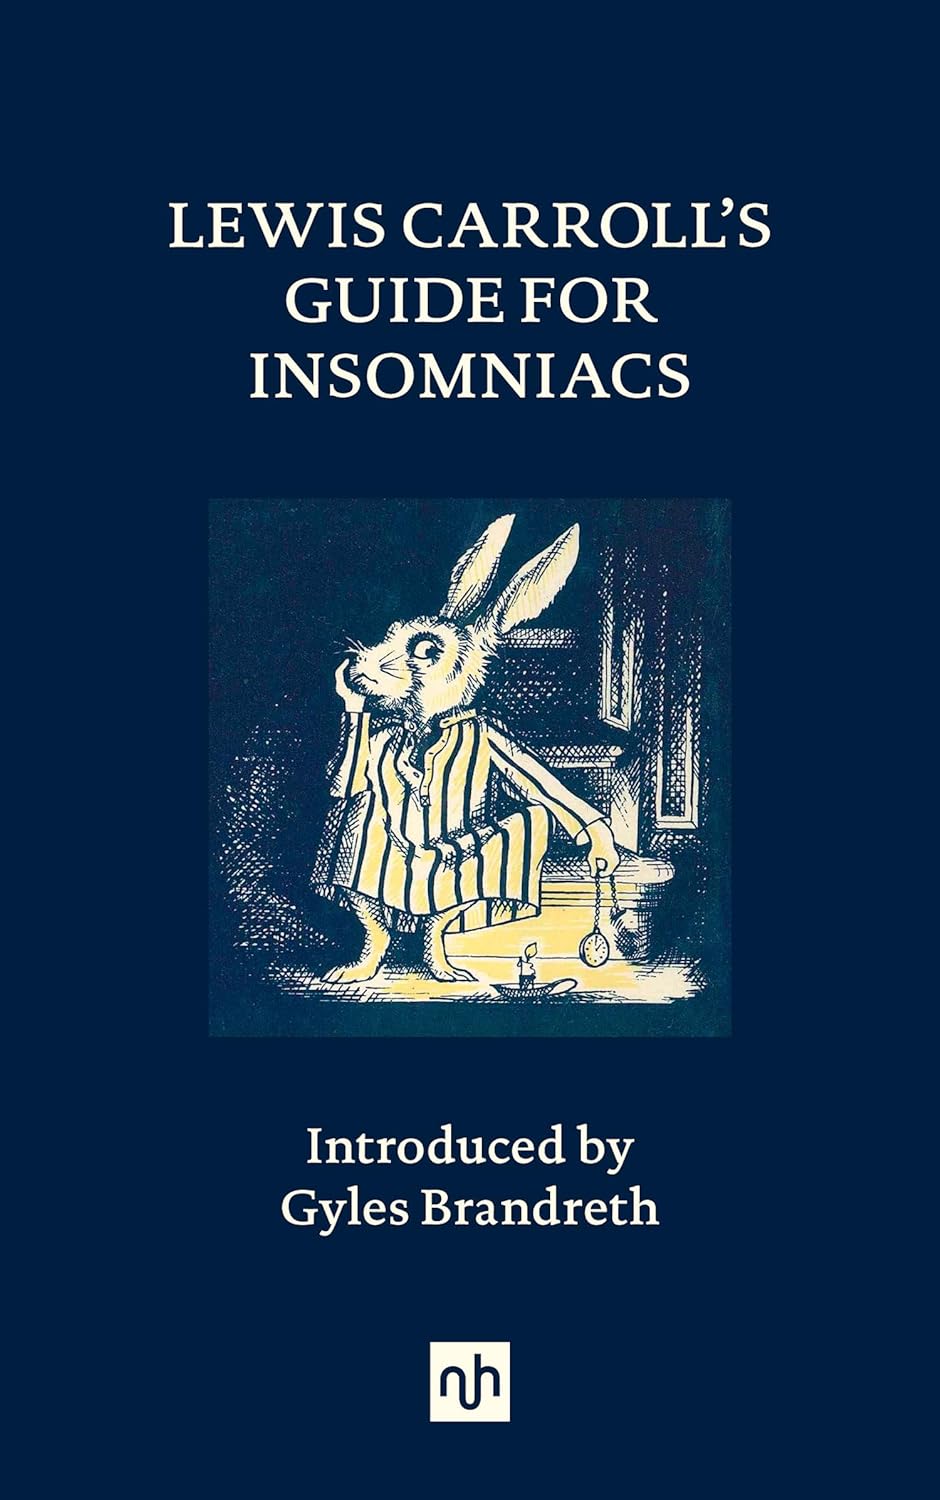 Lewis Carroll's Guide to Insomnia Book